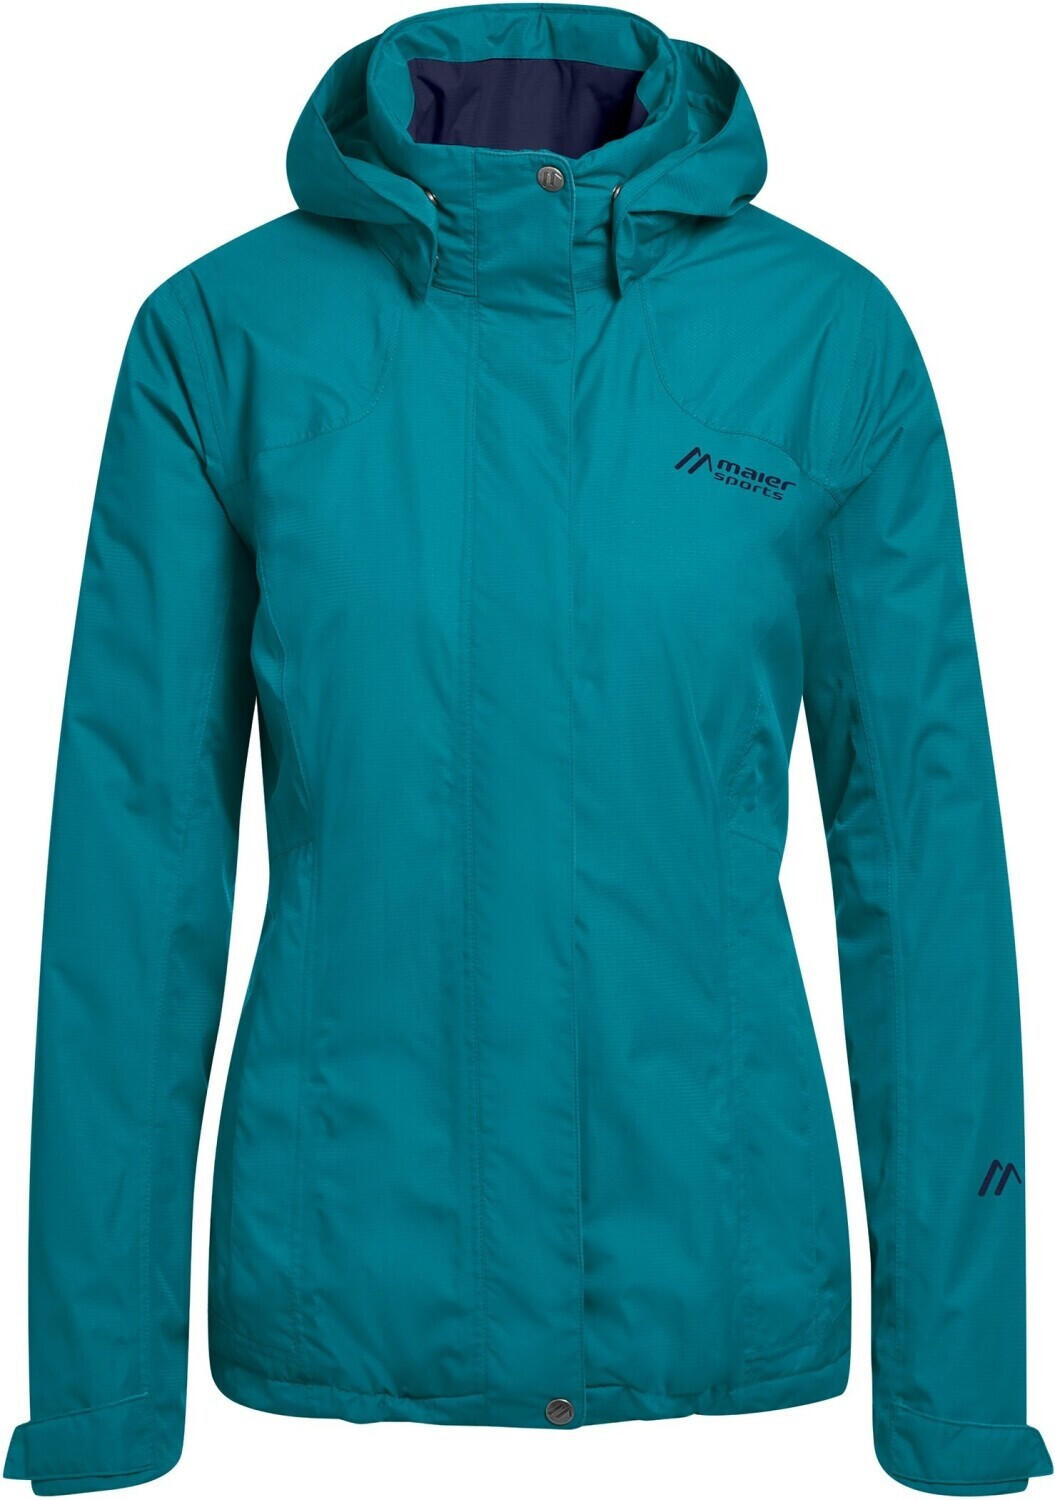 Jacket 116,75 TOP Metor Angebote ab Sports Women 2023) (Dezember dragonfly/night € Test Maier Therm